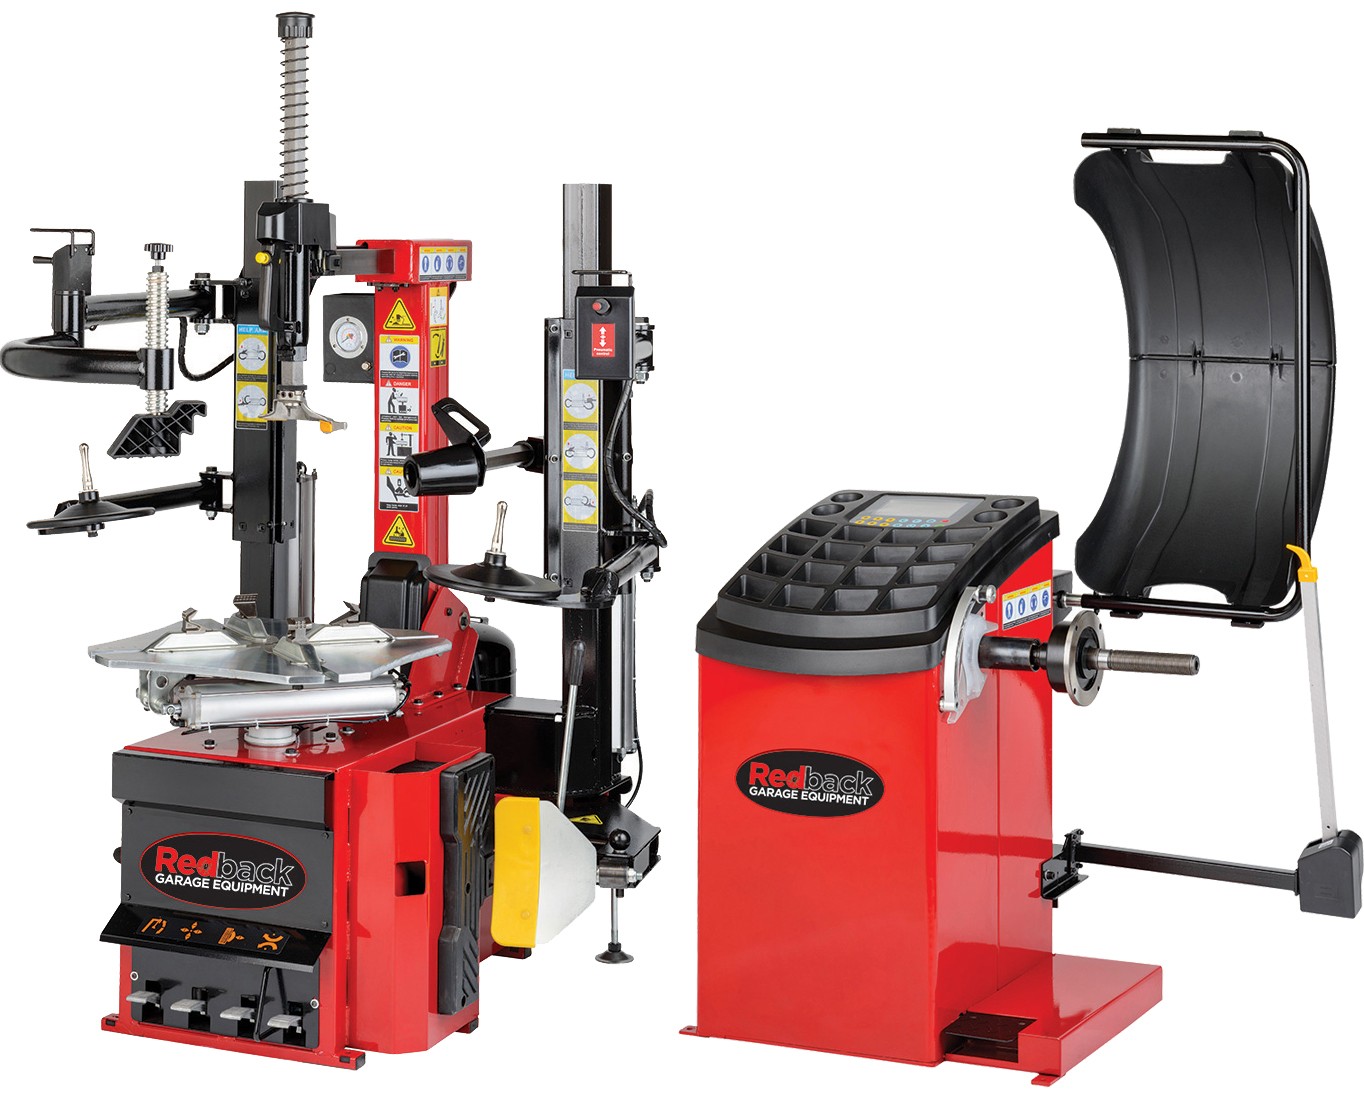 Tyre Service Equipment and Tyre Changing Equipment to order online